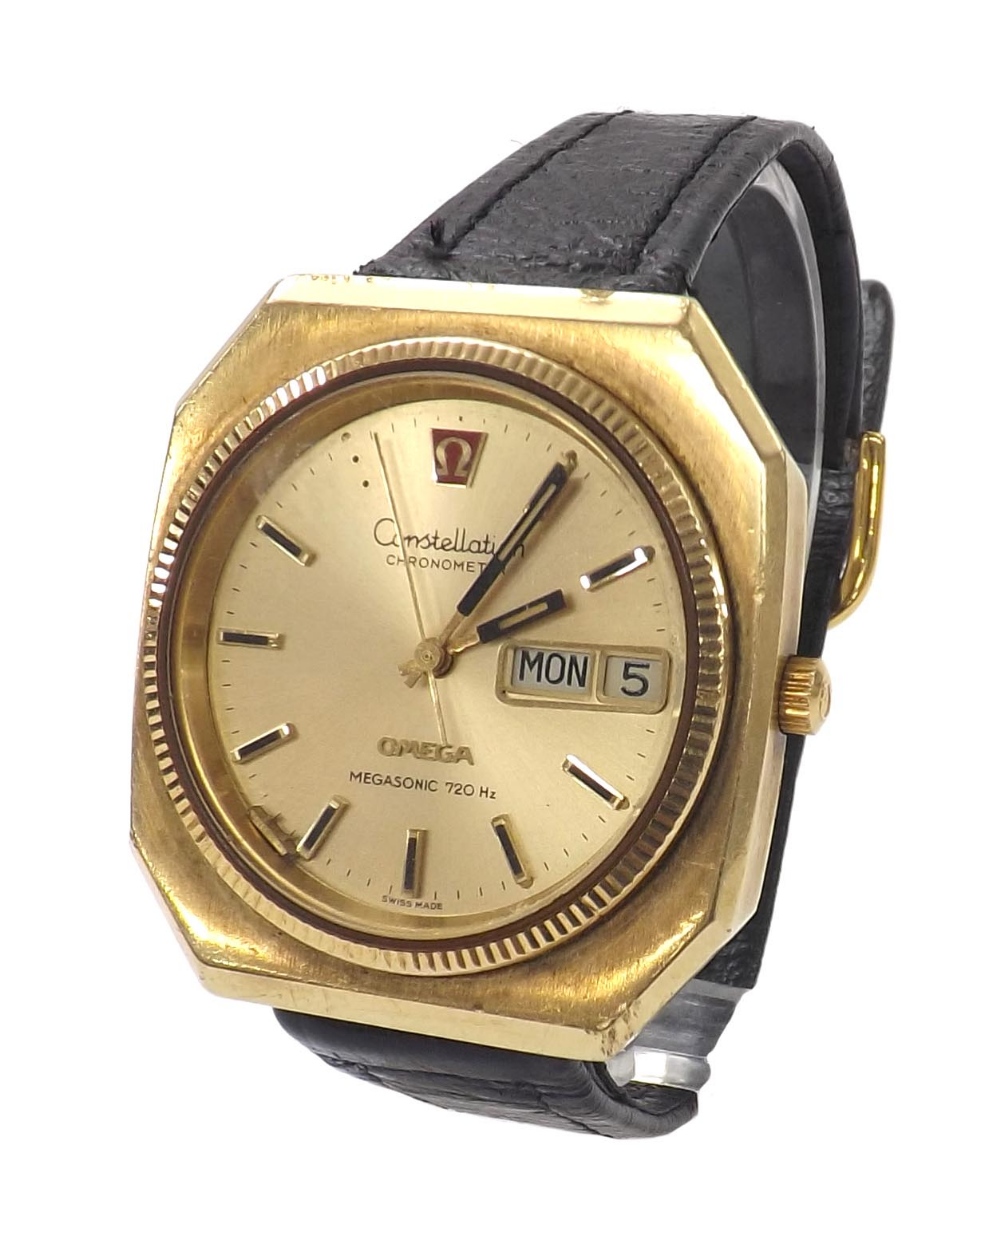 Omega Constellation Chronometer Megasonic 720Hz gold plated and stainless steel gentleman's